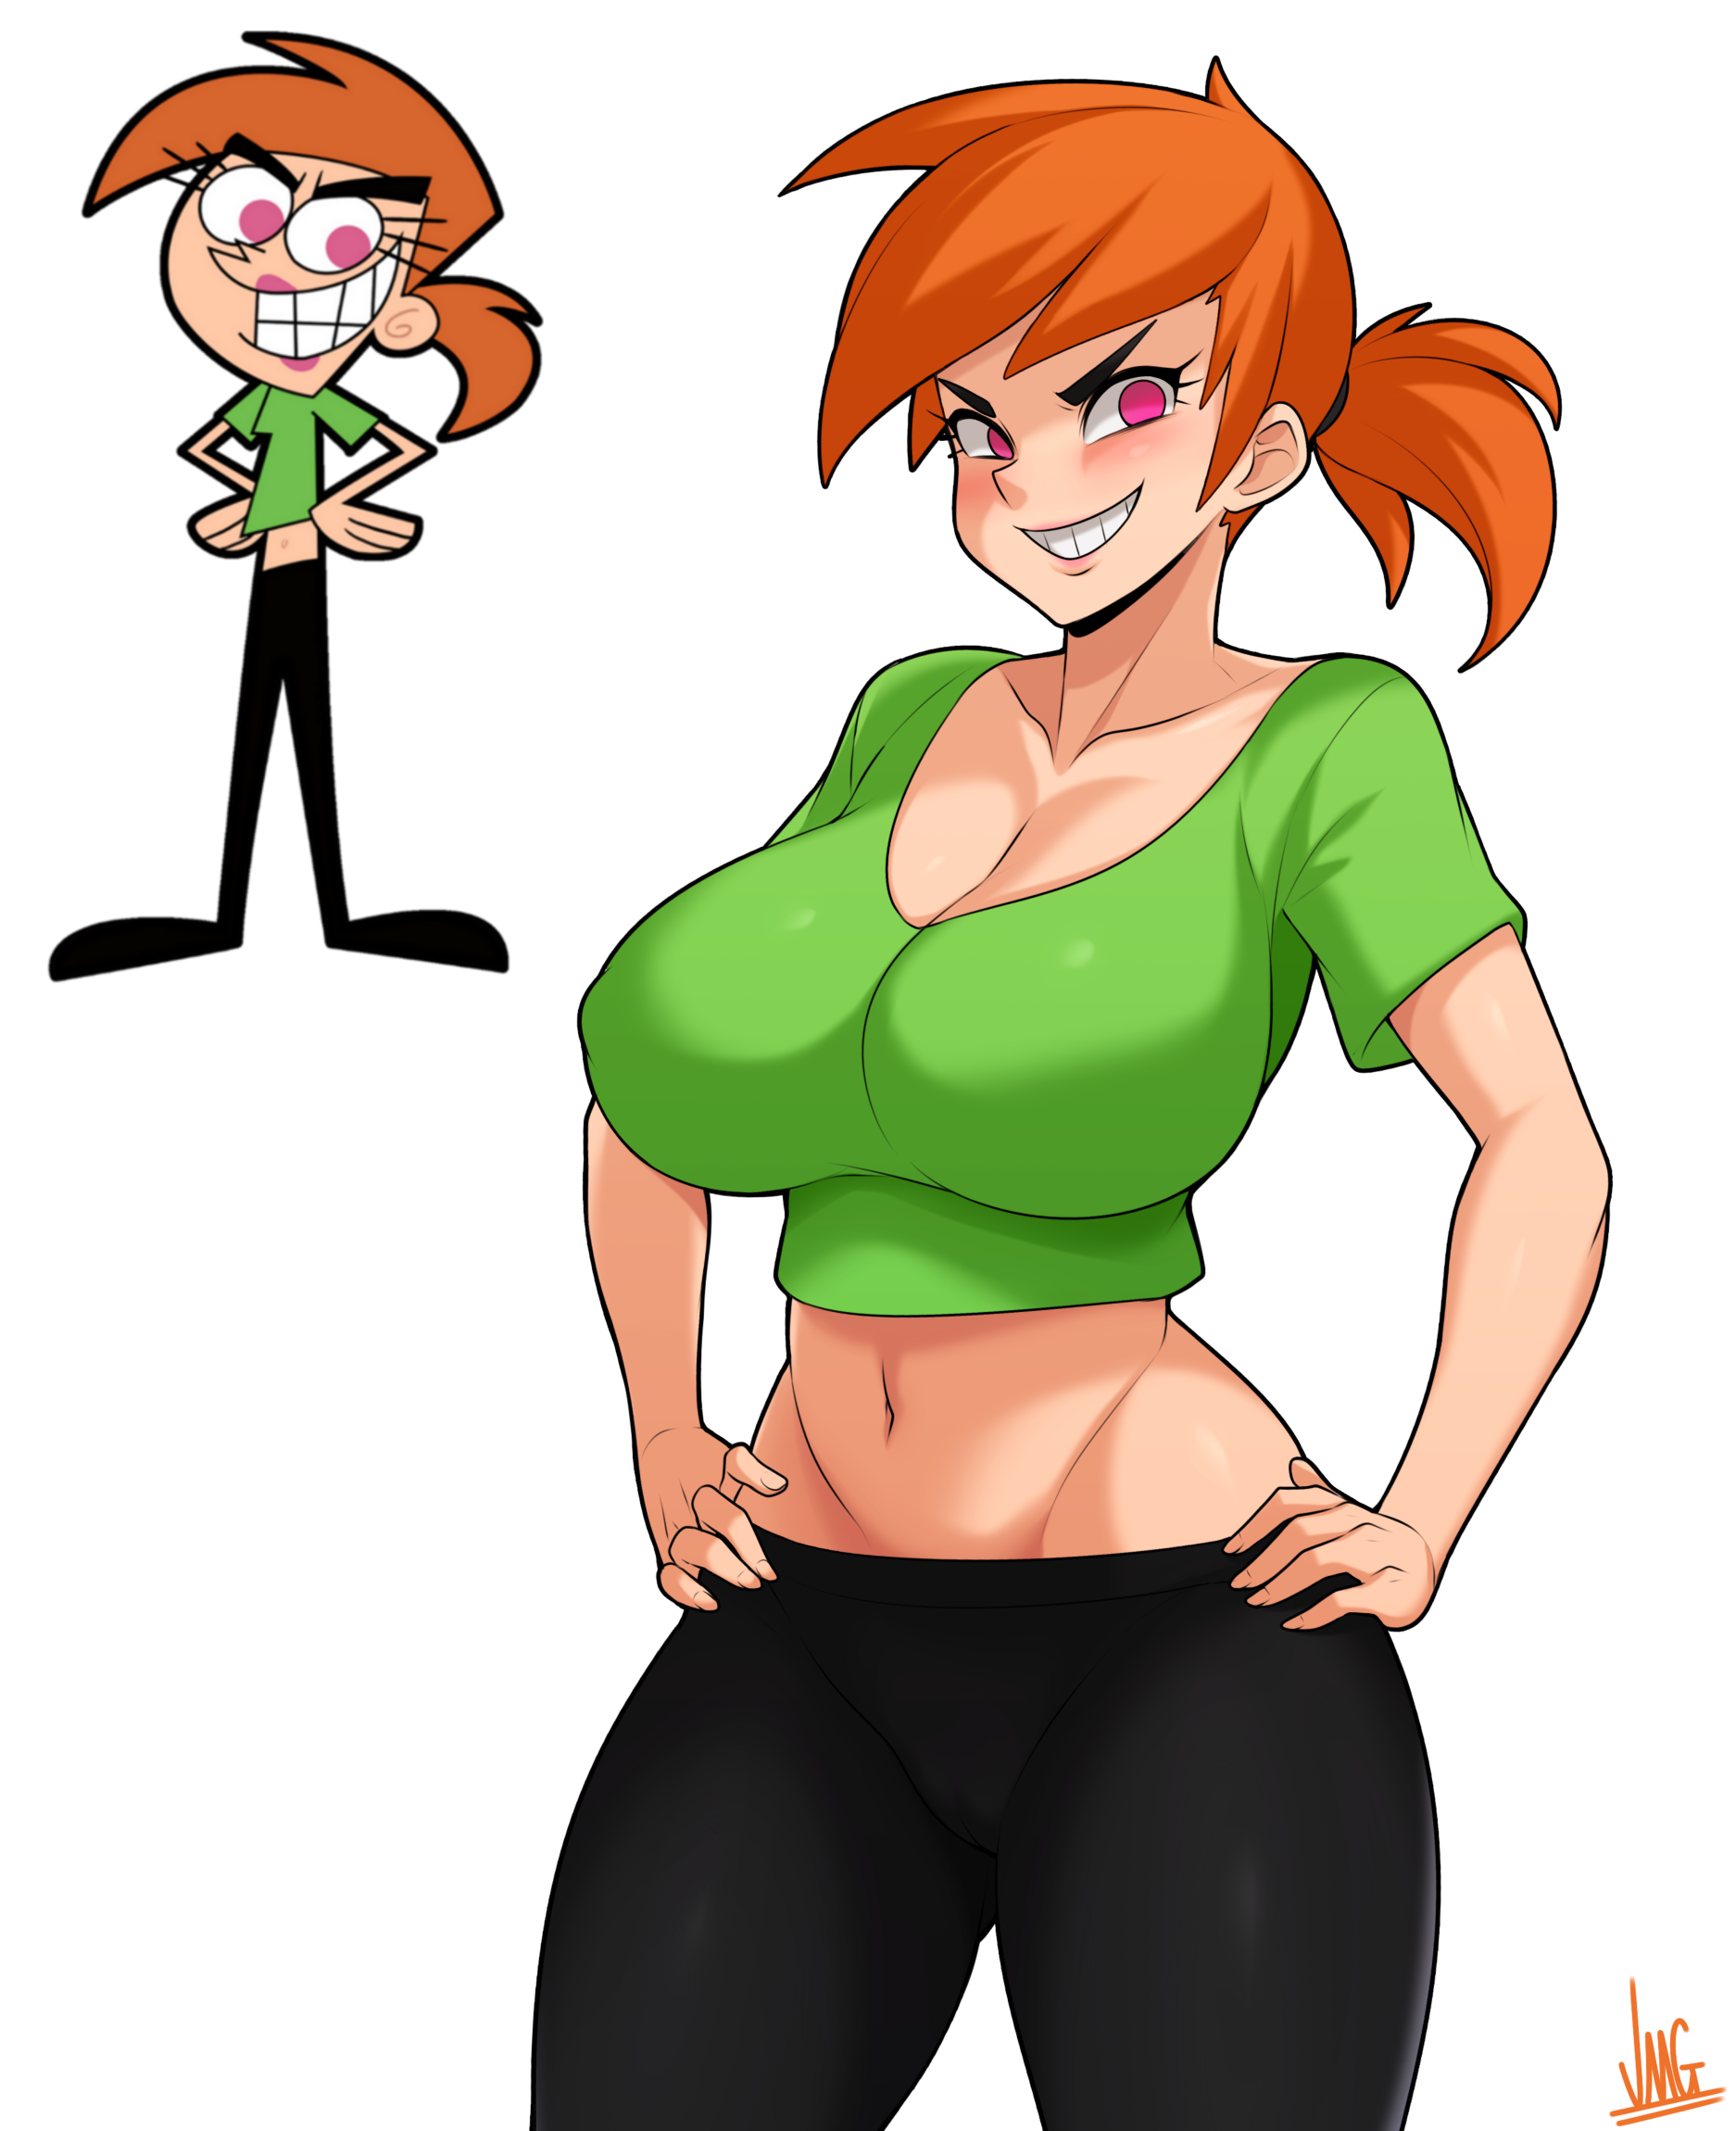 Vicky-巨乳The_Fairly_OddParents